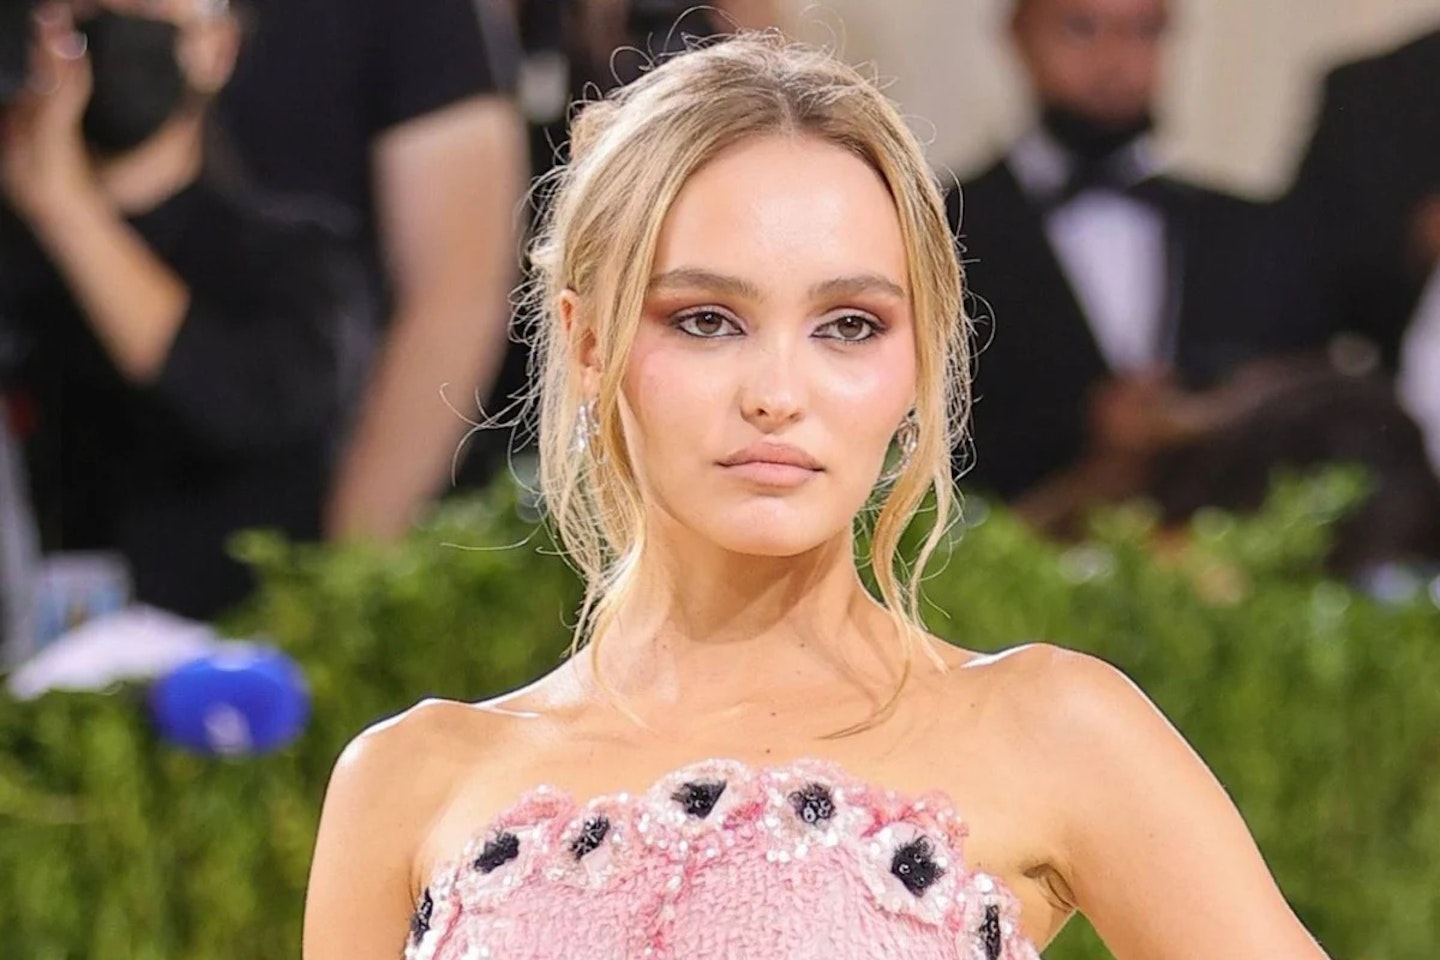 Lily-Rose Depp is the daughter of actor Johnny Depp